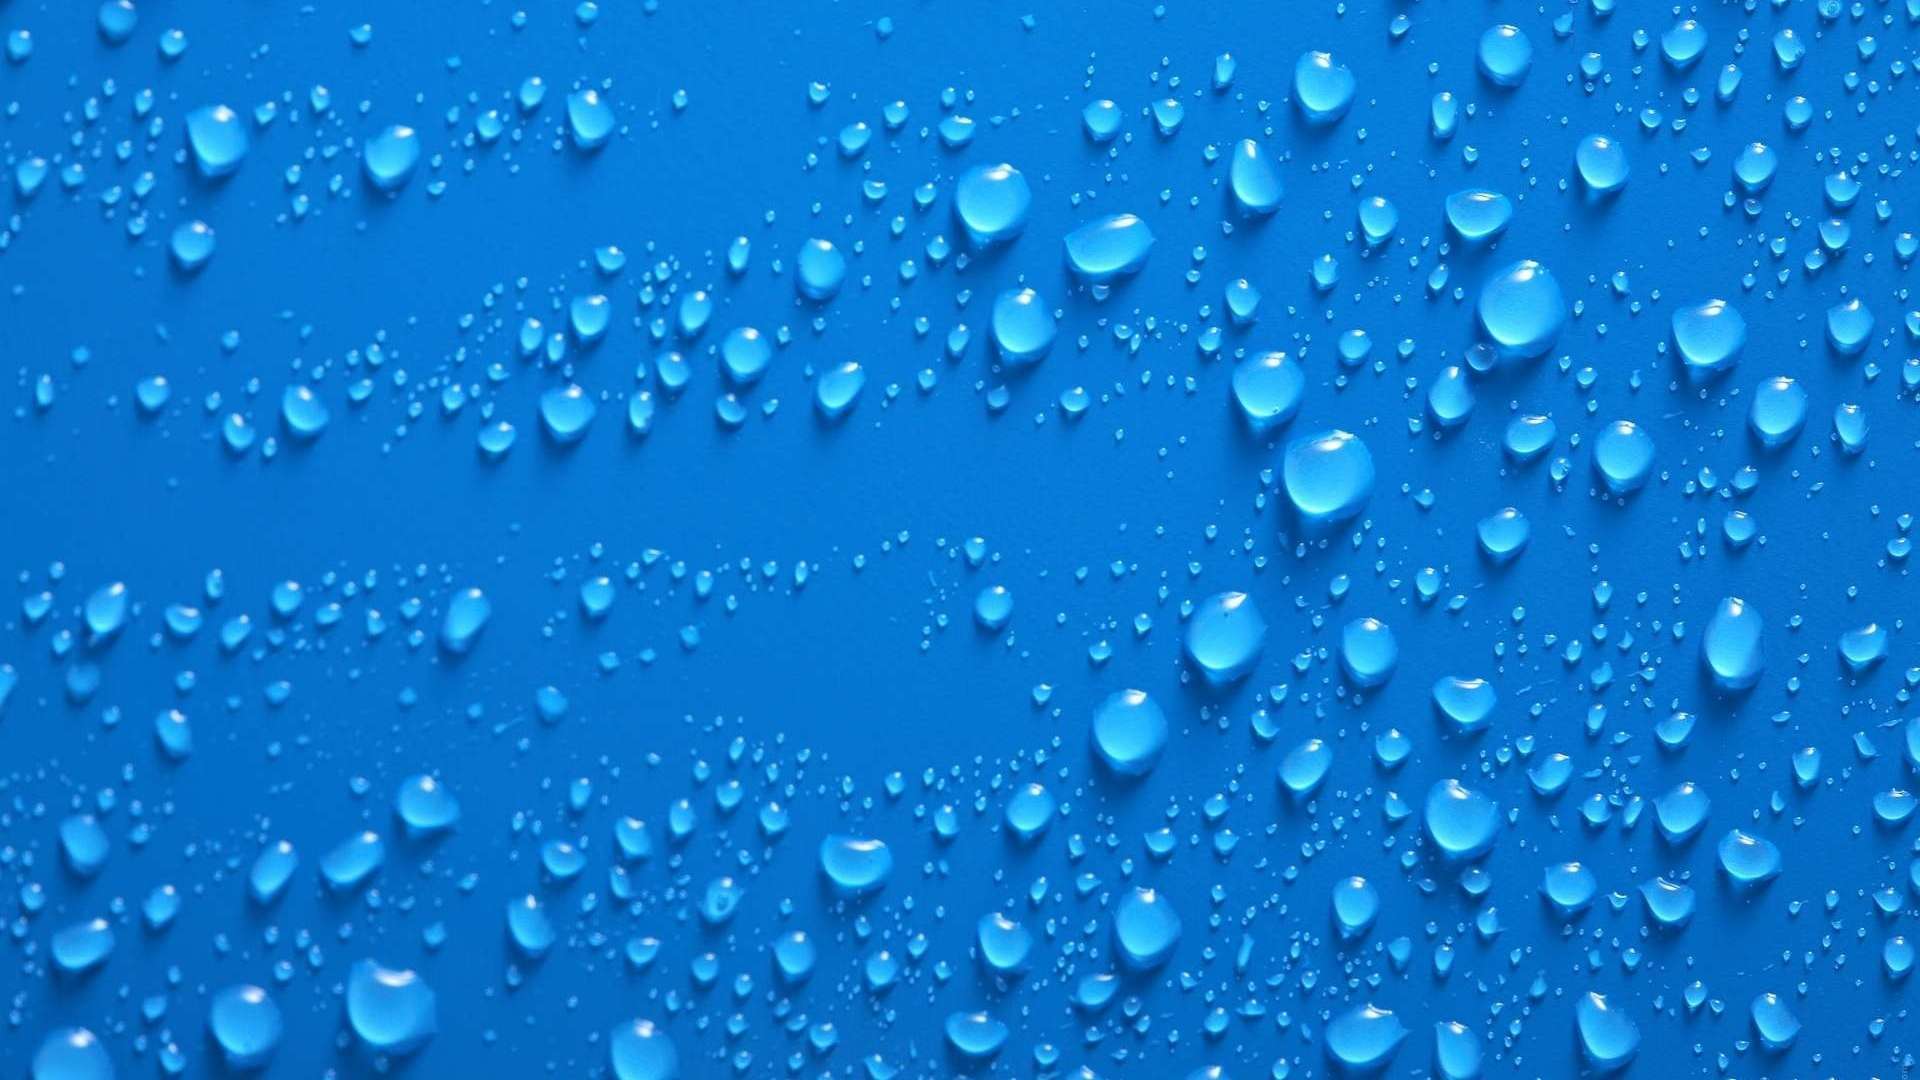 Wallpaper Drops Blue Background Surface HD 1080p Upload At